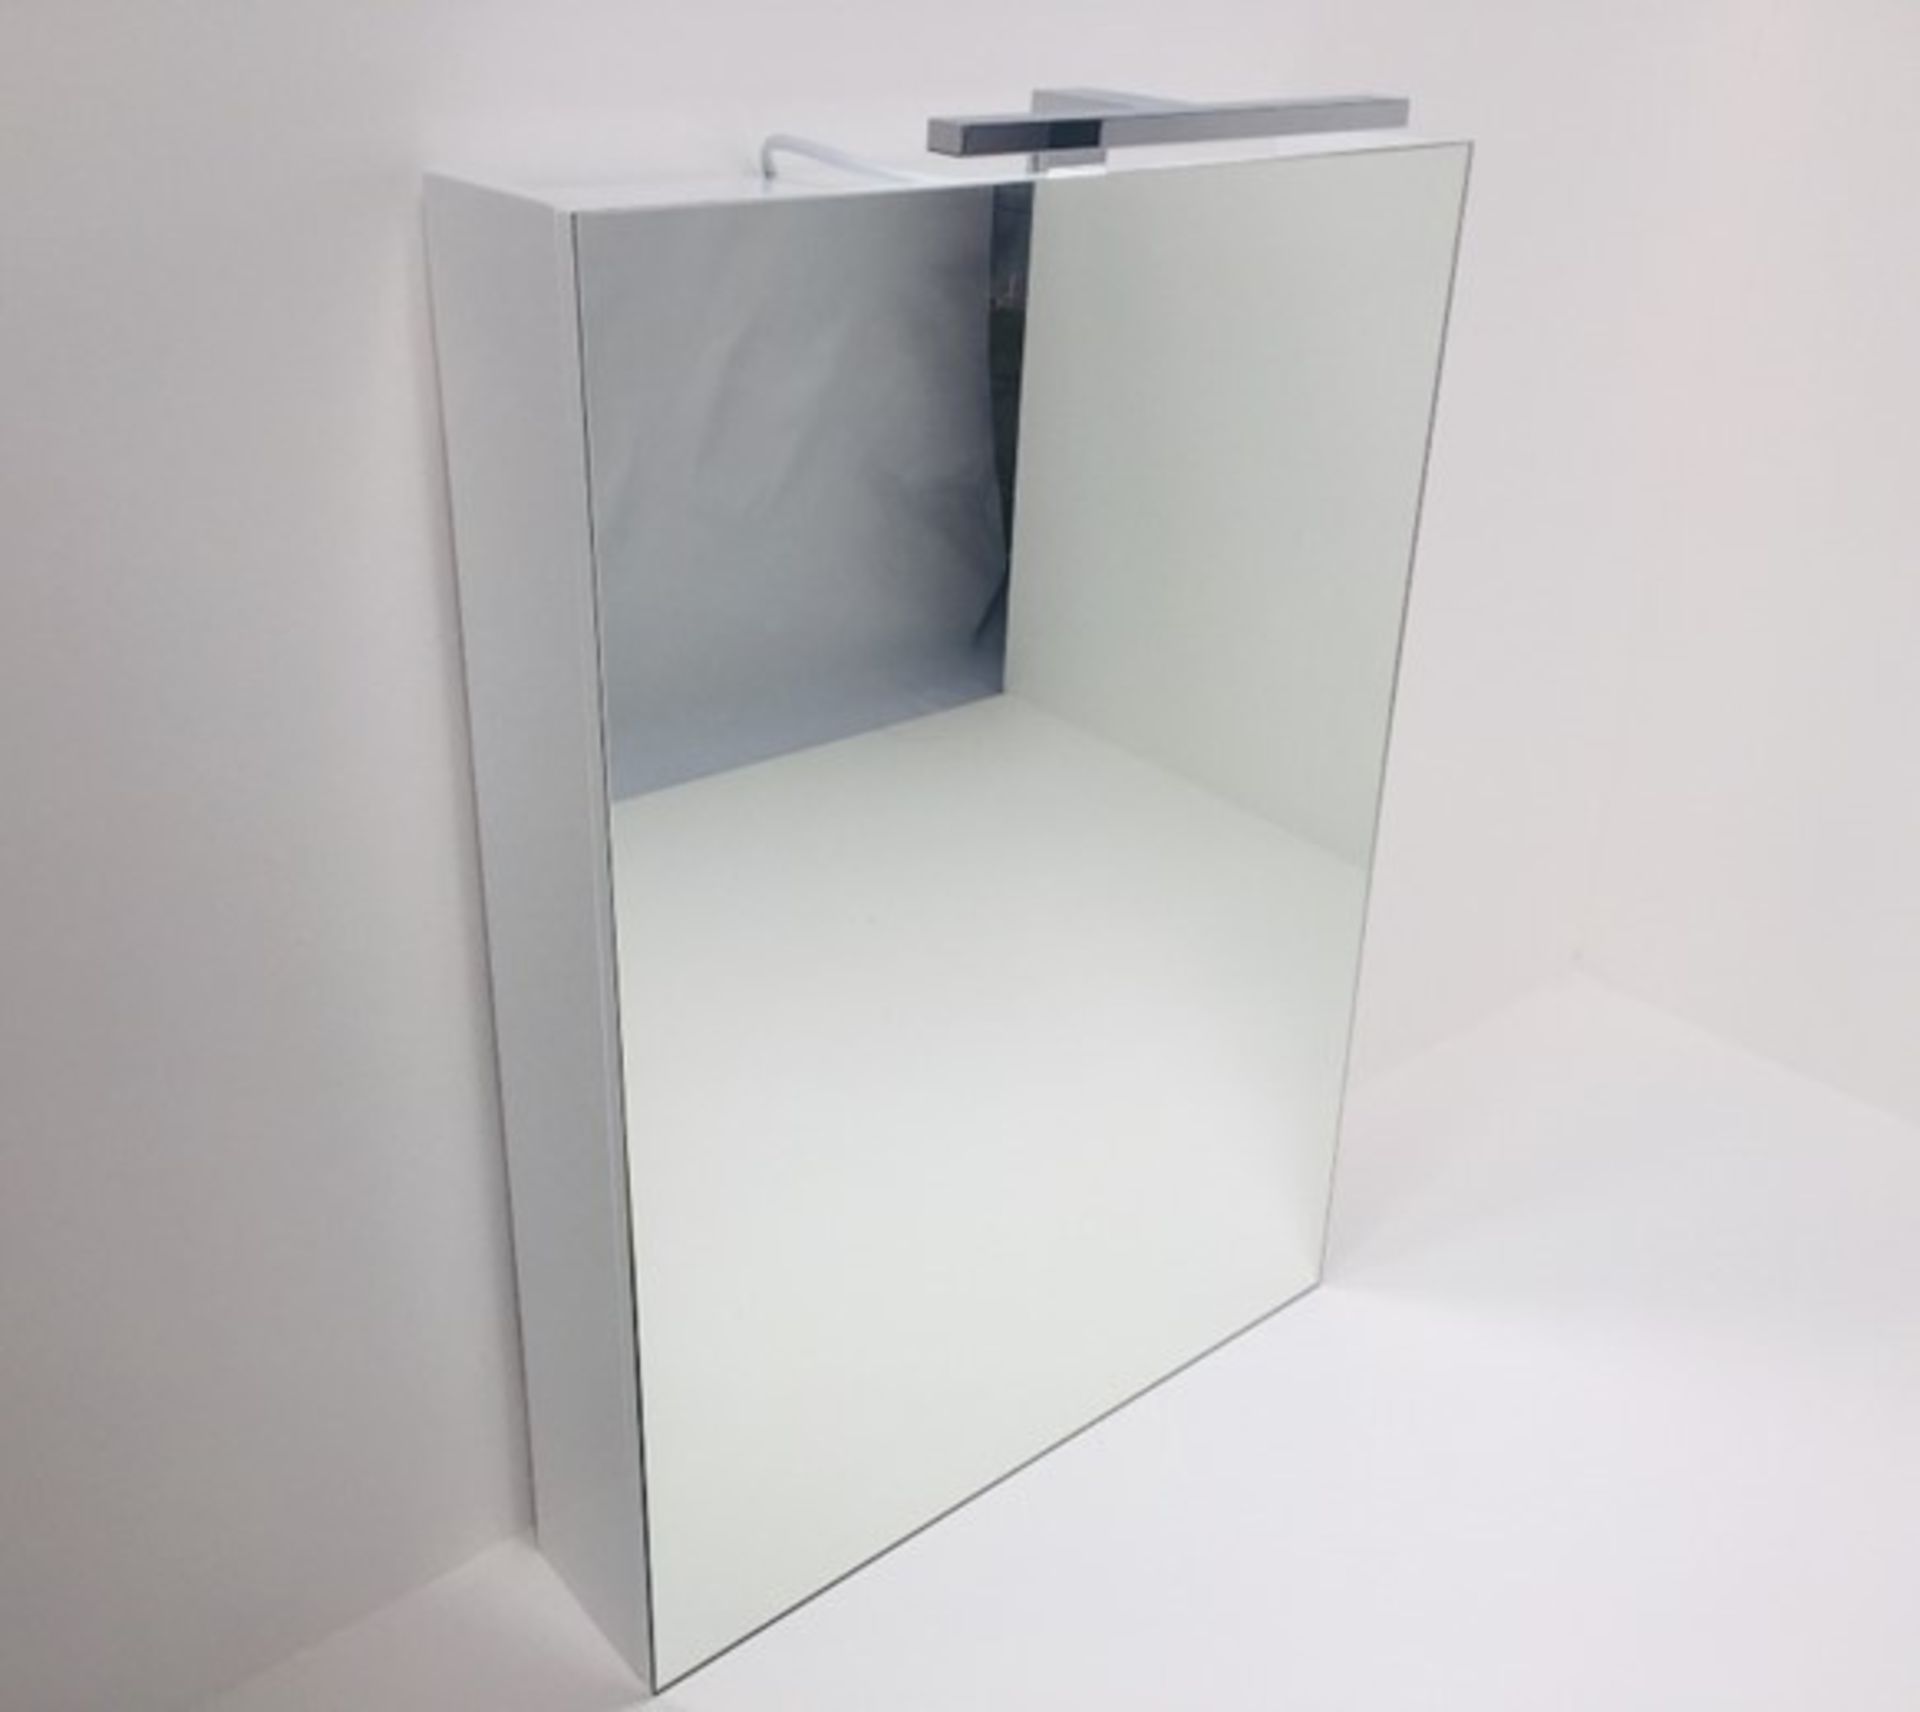 x 5 Mirrored Cabinets In White With LED Light